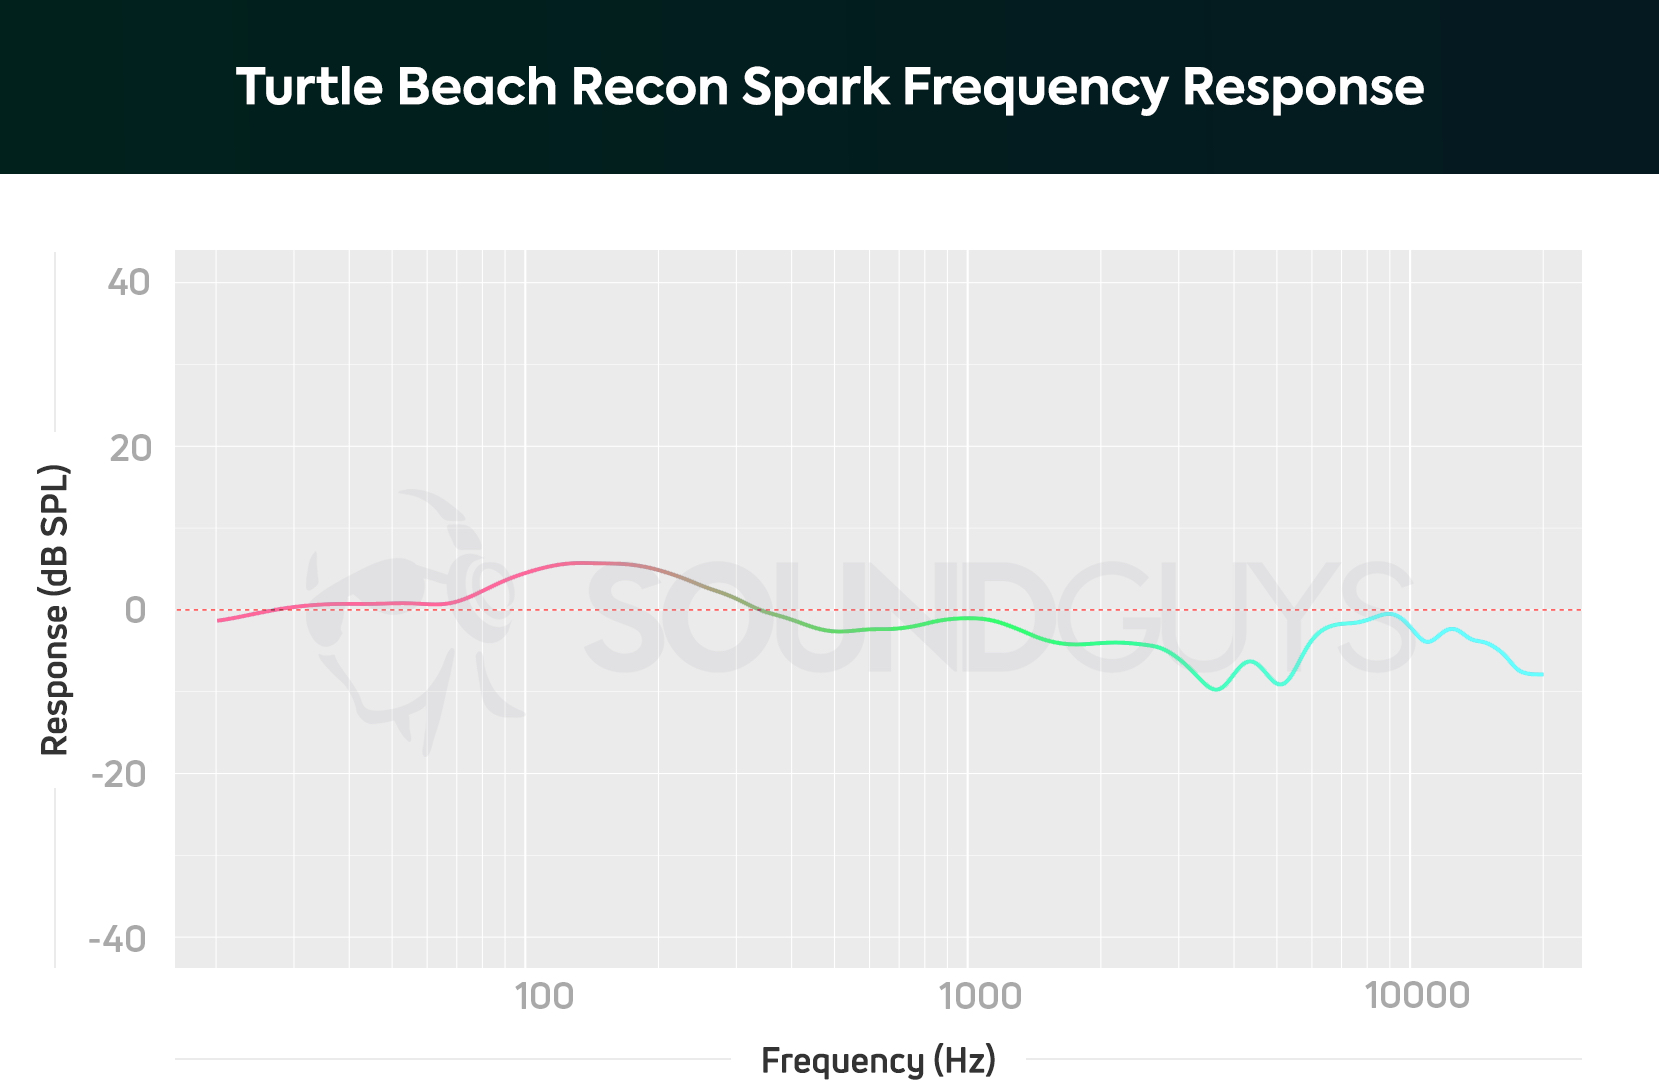 A frequency response chart for The Turtle Beach Recon Spark gaming headset, which shows a bump in the bass range